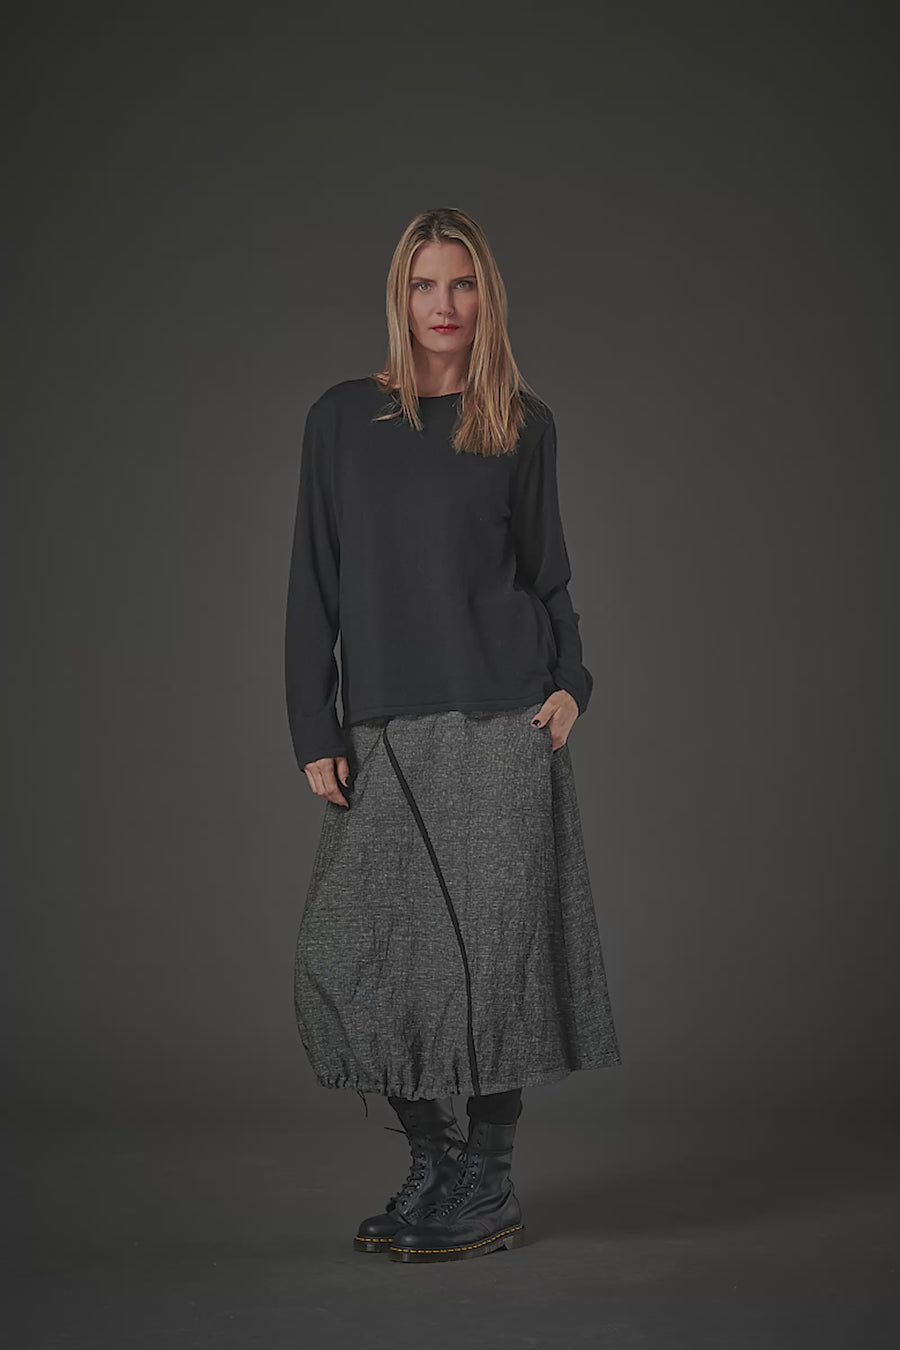 Skirt in precious structure wool-linen blend with 7% polyamide (261r2)